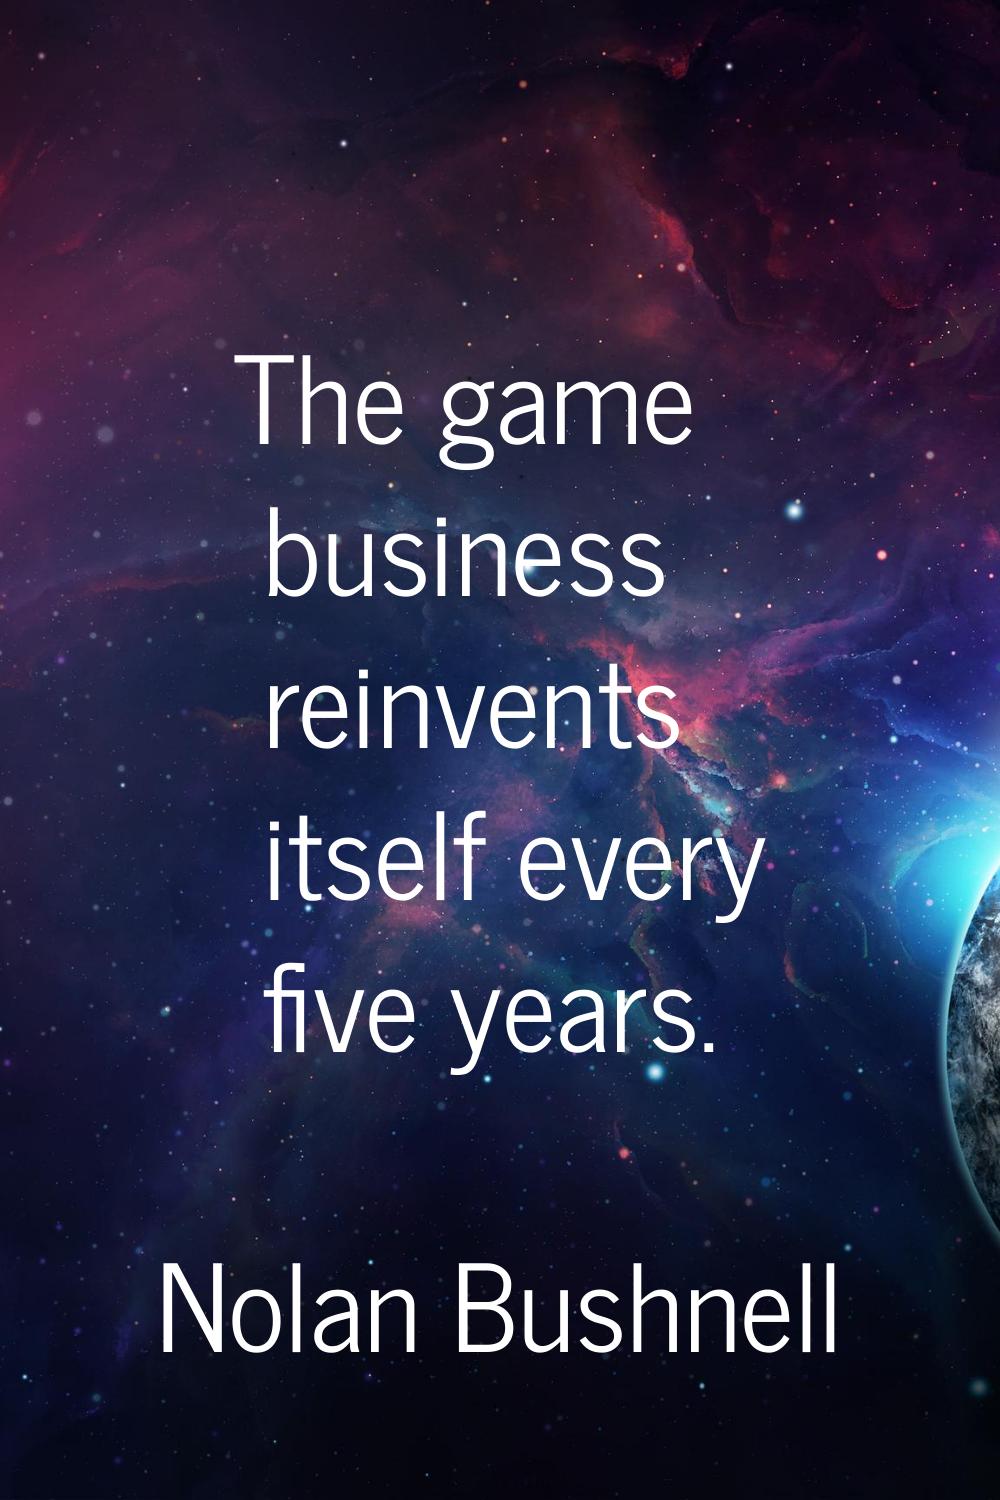 The game business reinvents itself every five years.